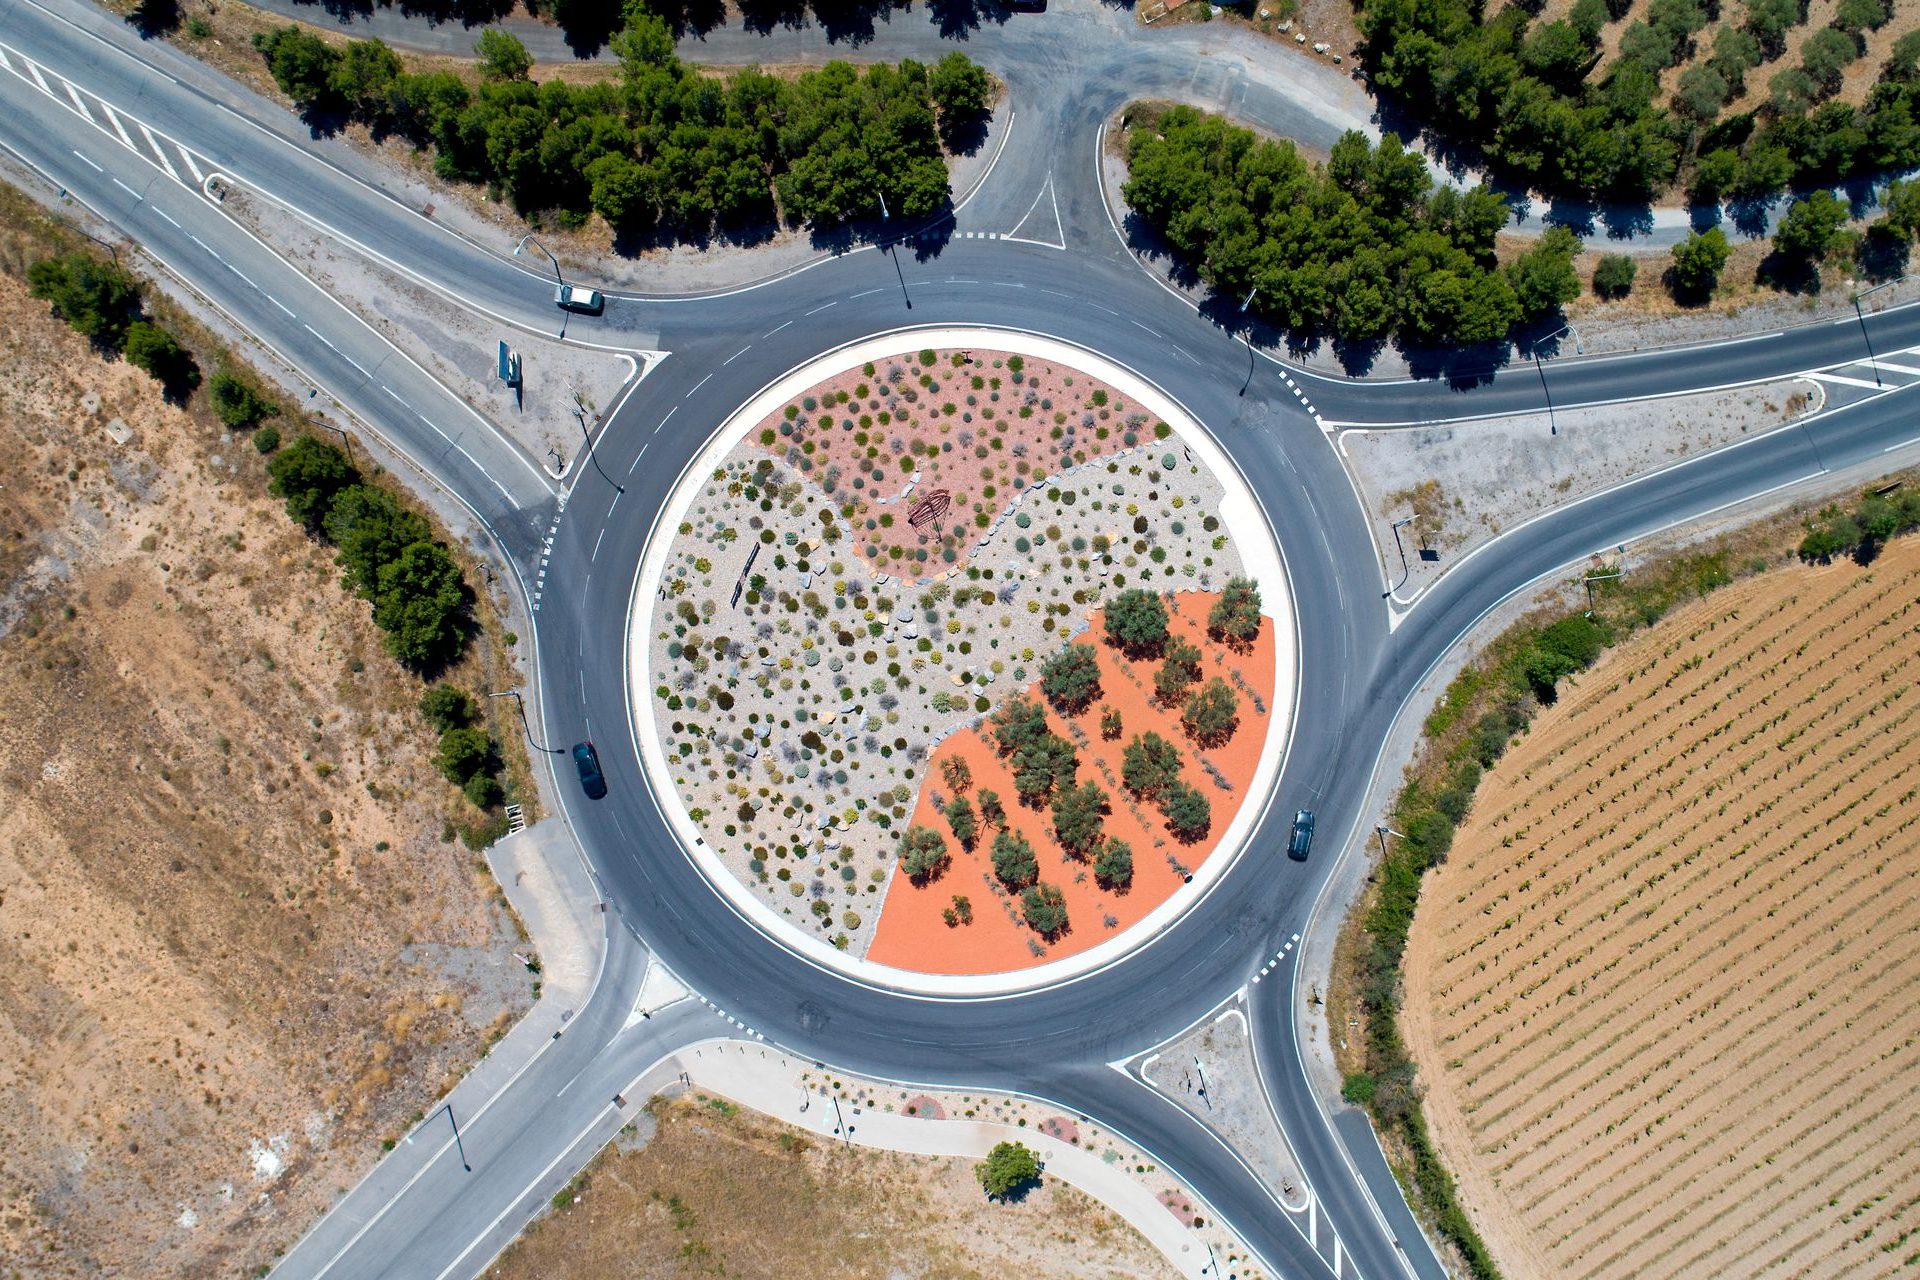 Which countries in the world have the most roundabouts?